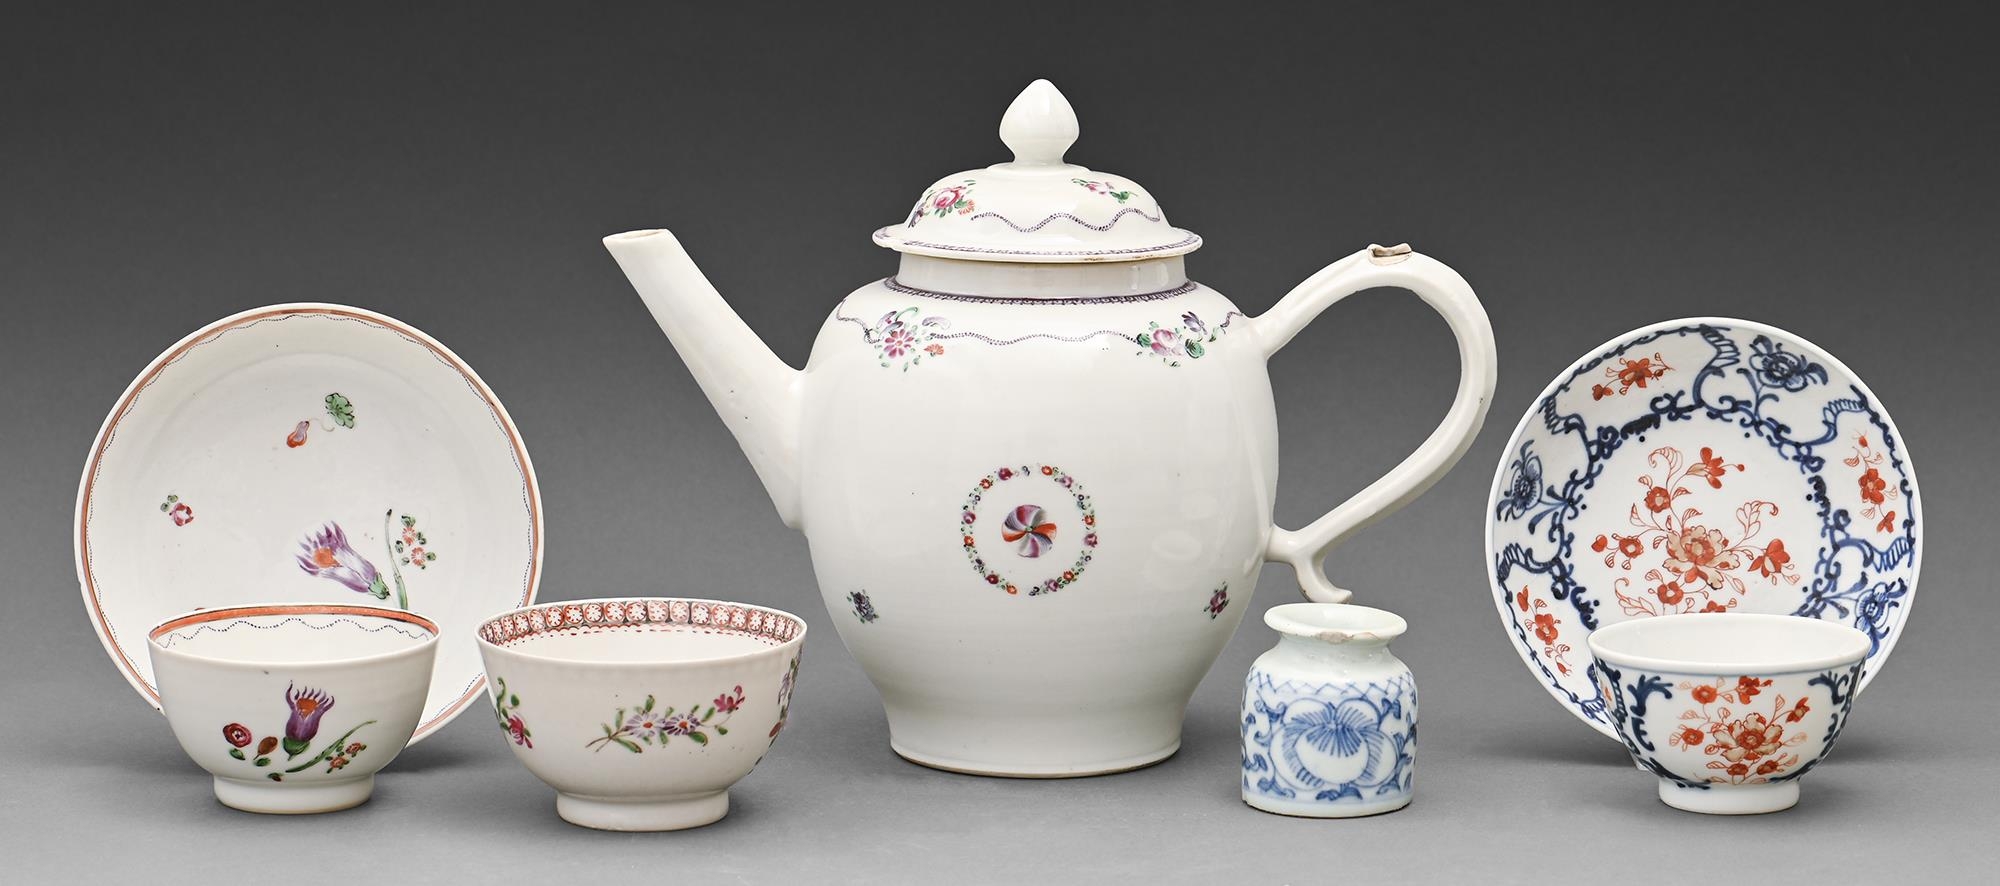 A Chinese export porcelain honey rose teapot and cover, c1780, 18cm h, two contemporary tea bowls